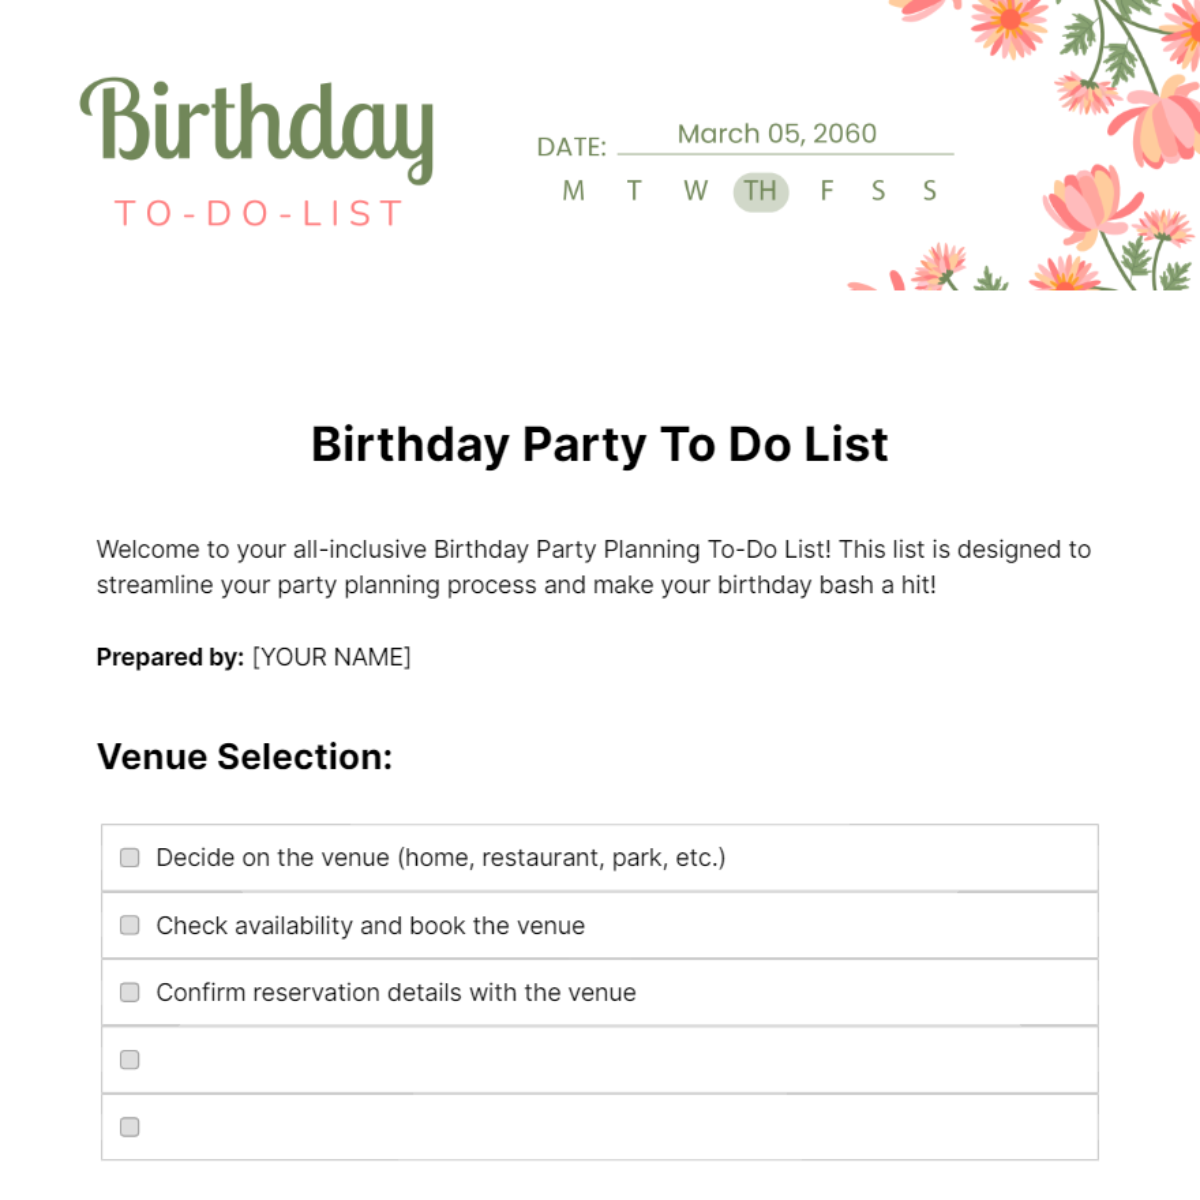 Birthday Party To Do List Template